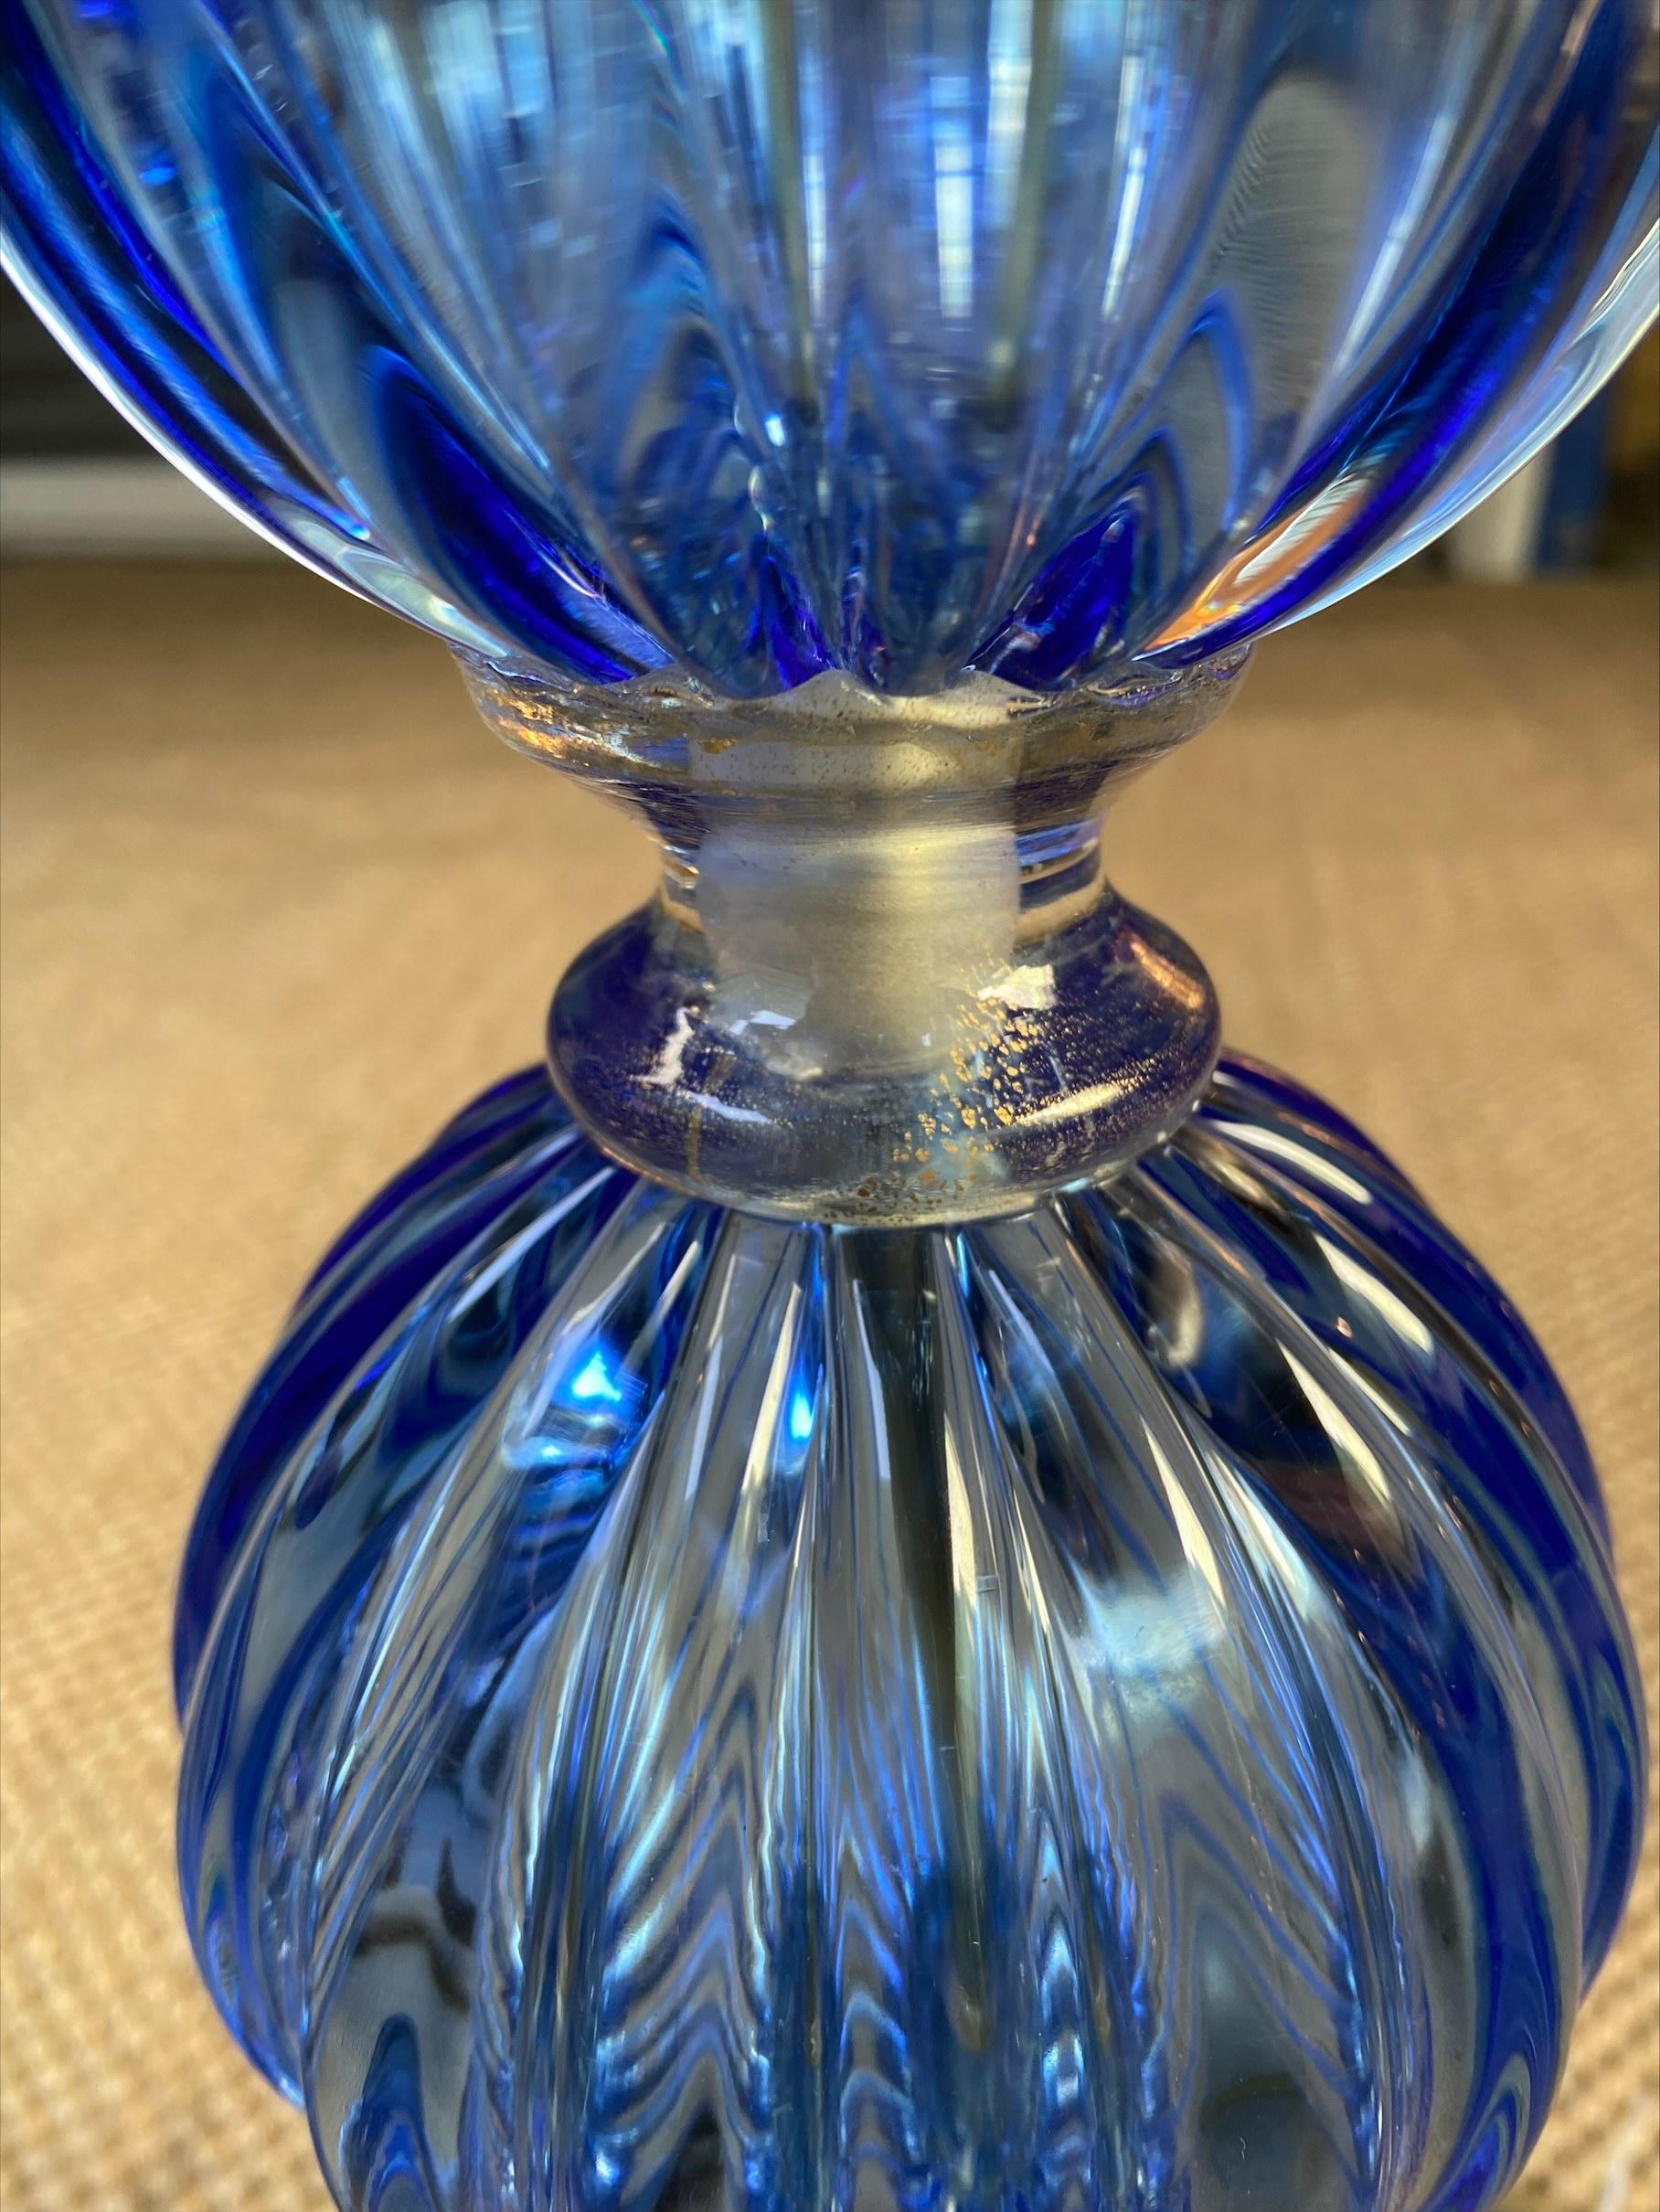 Pair of Alberto Dona blue table lamps, 1980
Italy
Murano glass
Signed
Measures: H 60, L 20.5.